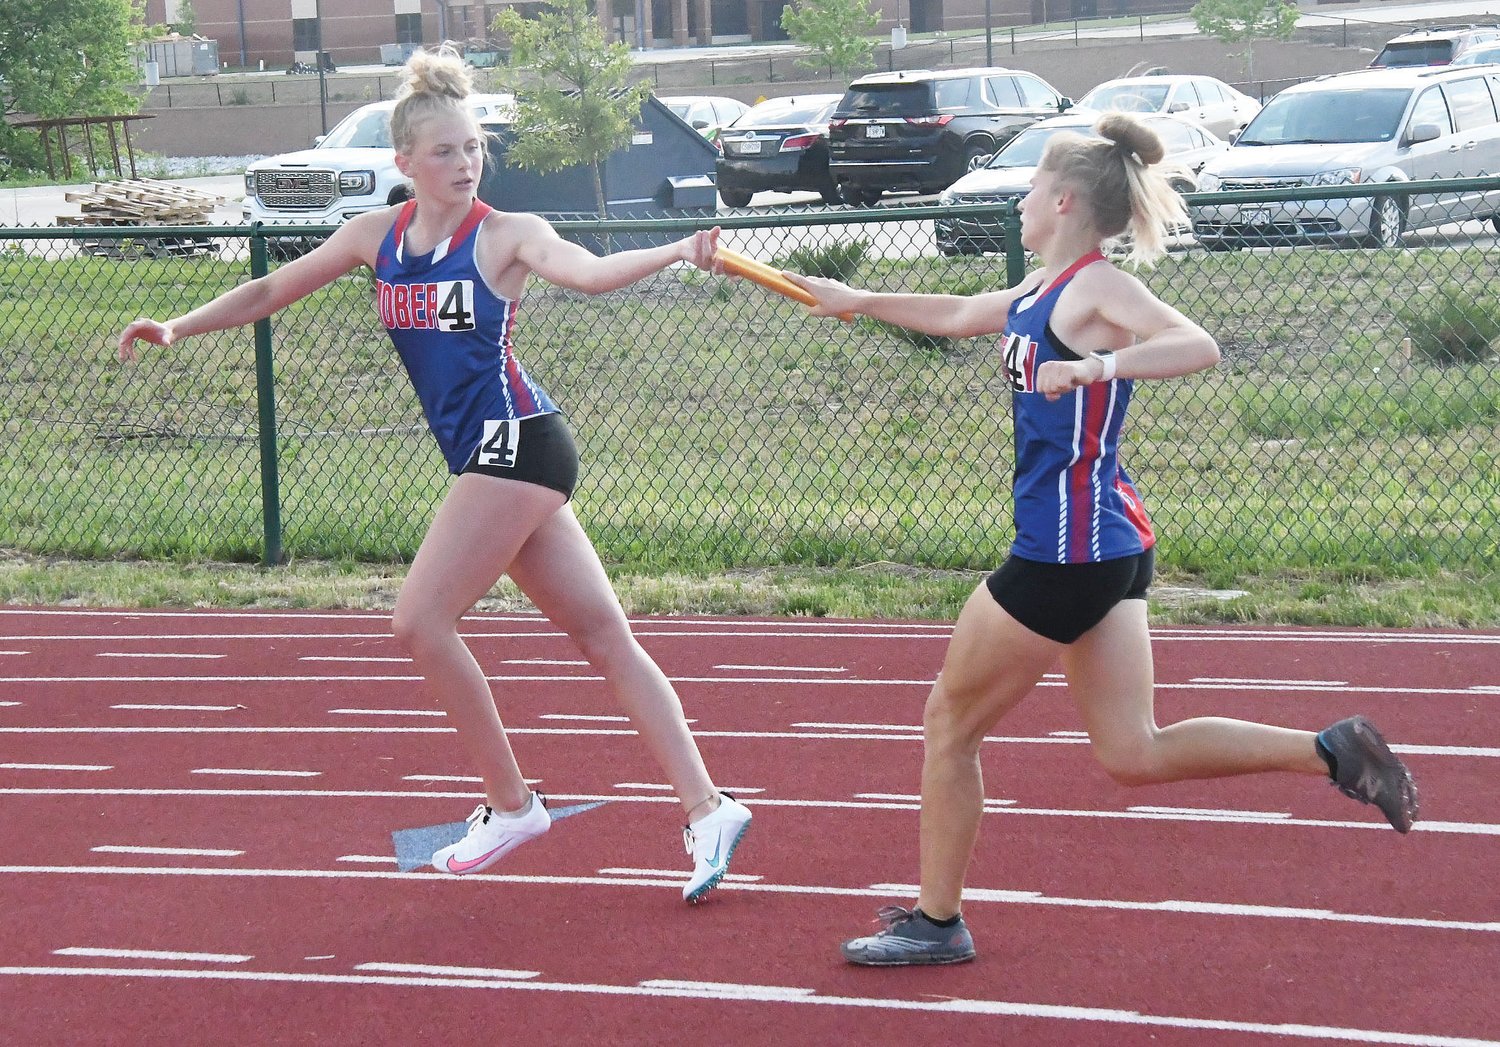 Moberly's Bryleigh Knox accepts the baton from teammate Anna Rivera during the running of the 4x400-meter relay at the Class 4 District 4 meet in Wentzville on May 14.